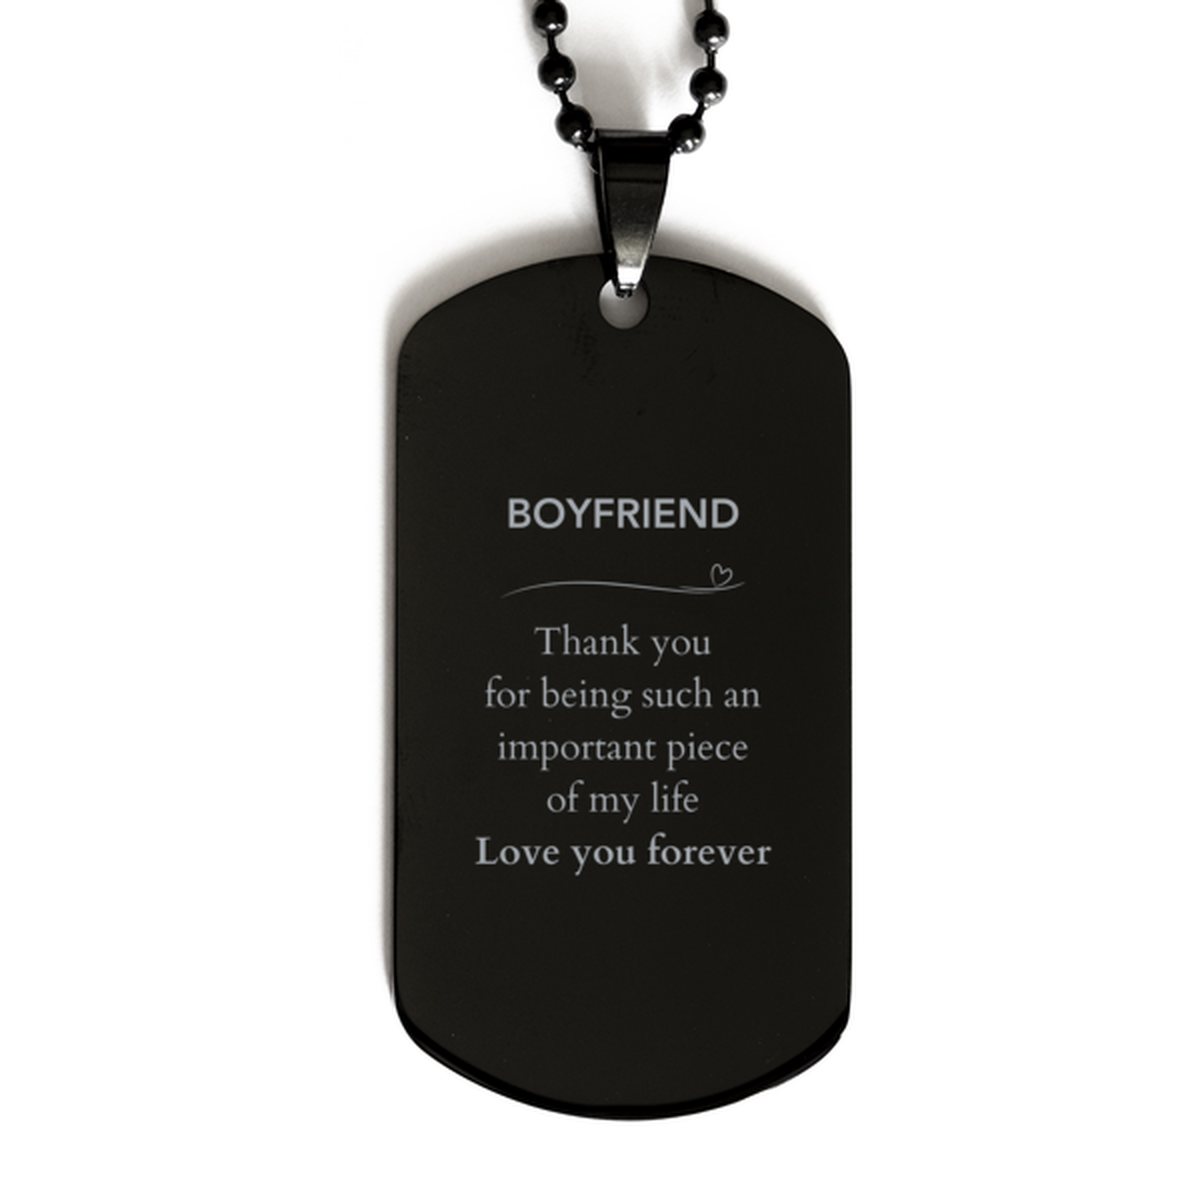 Appropriate Boyfriend Black Dog Tag Epic Birthday Gifts for Boyfriend Thank you for being such an important piece of my life Boyfriend Christmas Mothers Fathers Day